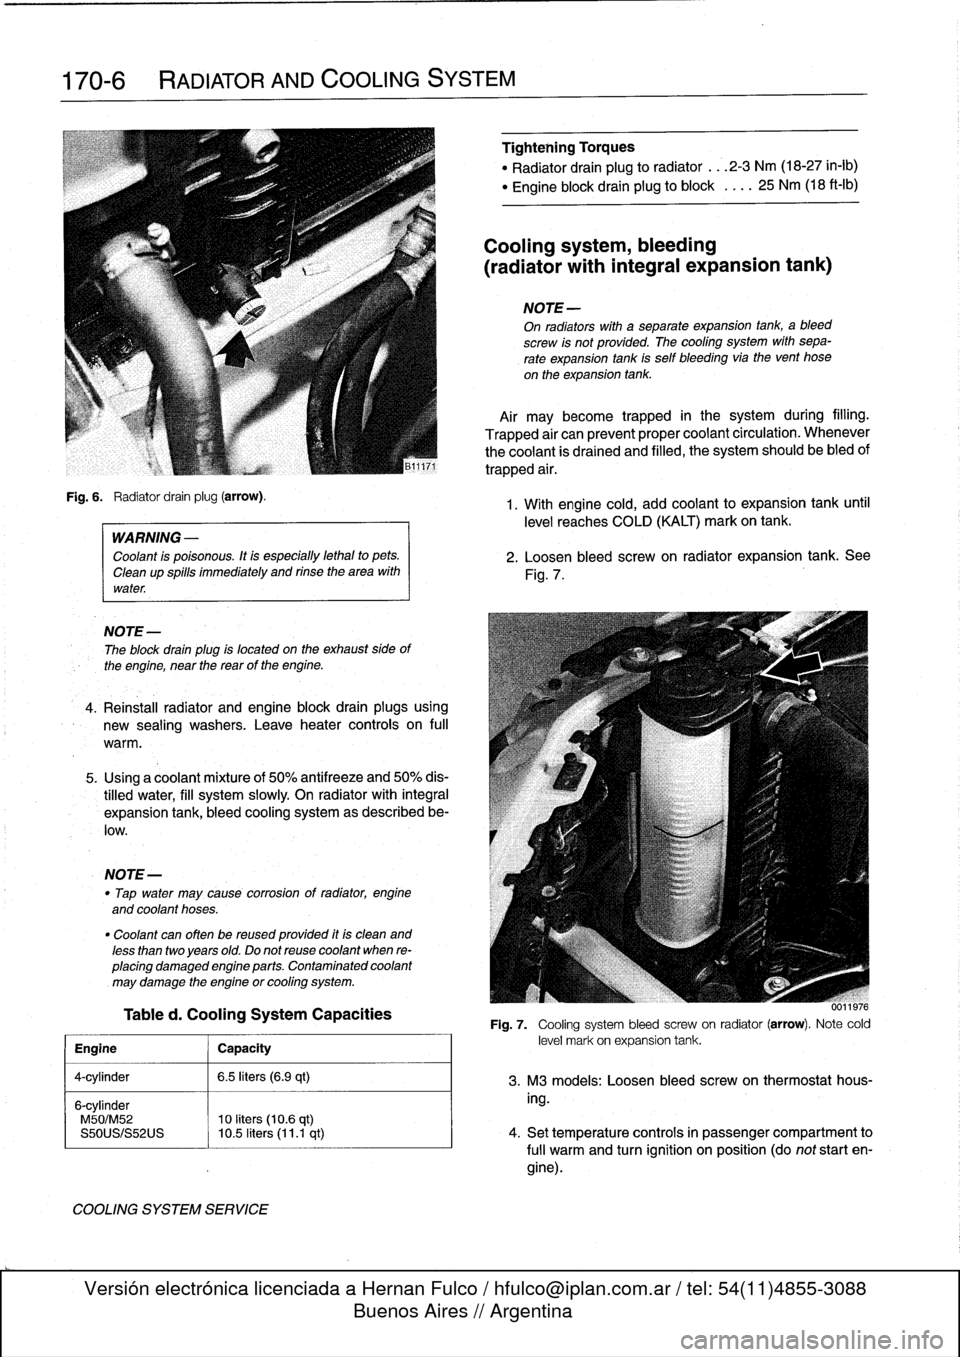 BMW 318i 1996 E36 Workshop Manual 
170-6

	

RADIATOR
AND
COOLING
SYSTEM

Fig
.
6
.

	

Radiator
drain
plug
(arrow)
.

WARNING
-

Coolant
is
poisonous
.
Itis
especially
lethal
to
pets
.

Cleanup
spills
immediately
and
rinse
the
area
w